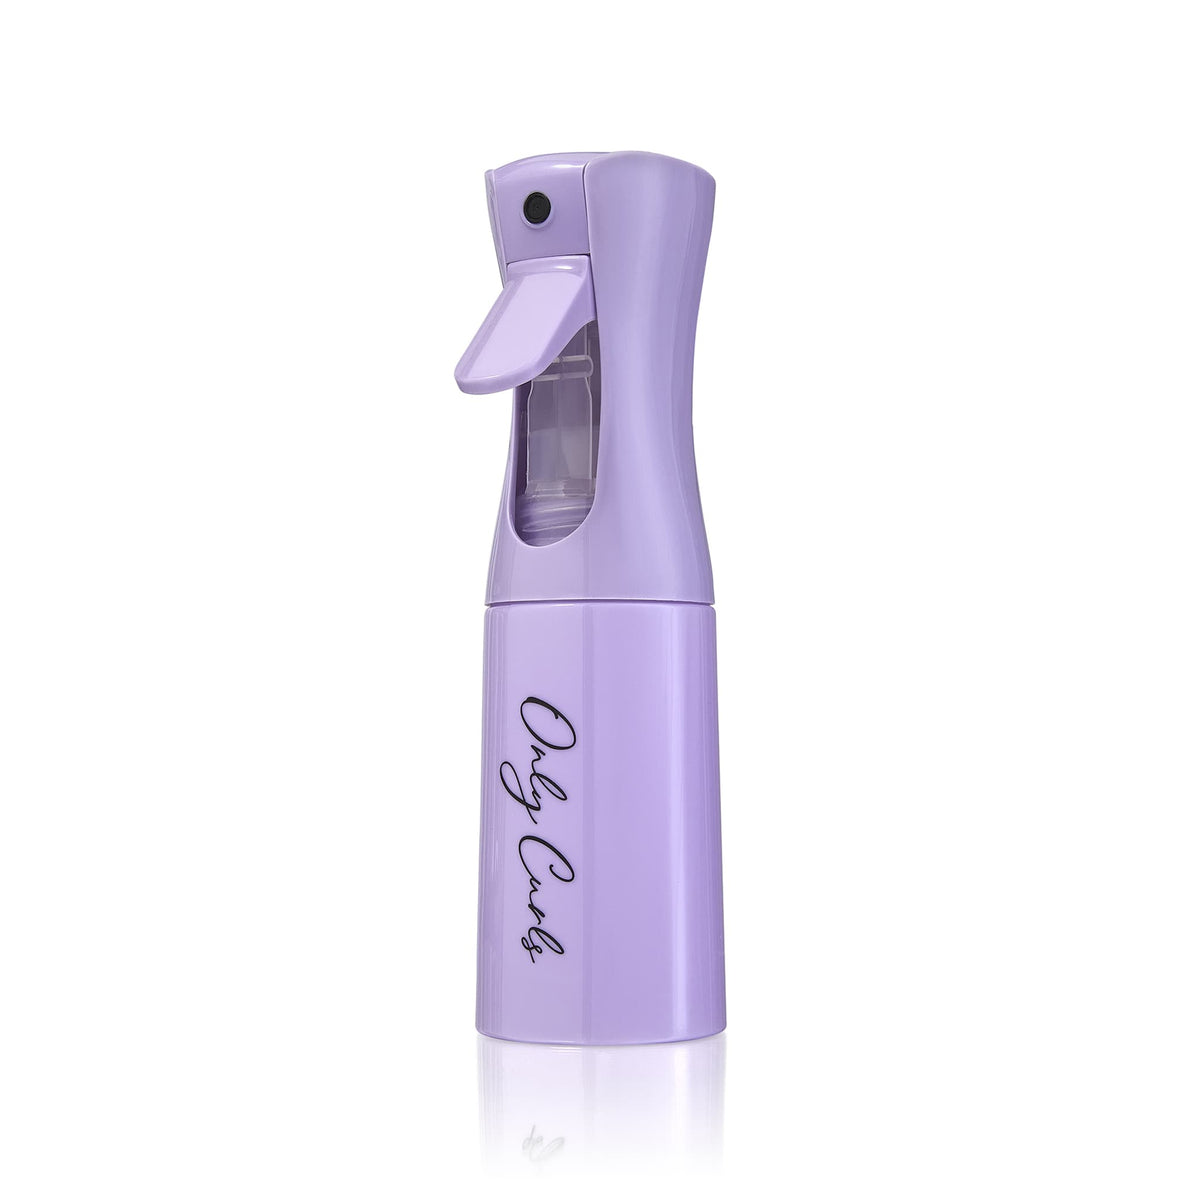 Only Curls Misting Bottle - Lilac - Only Curls